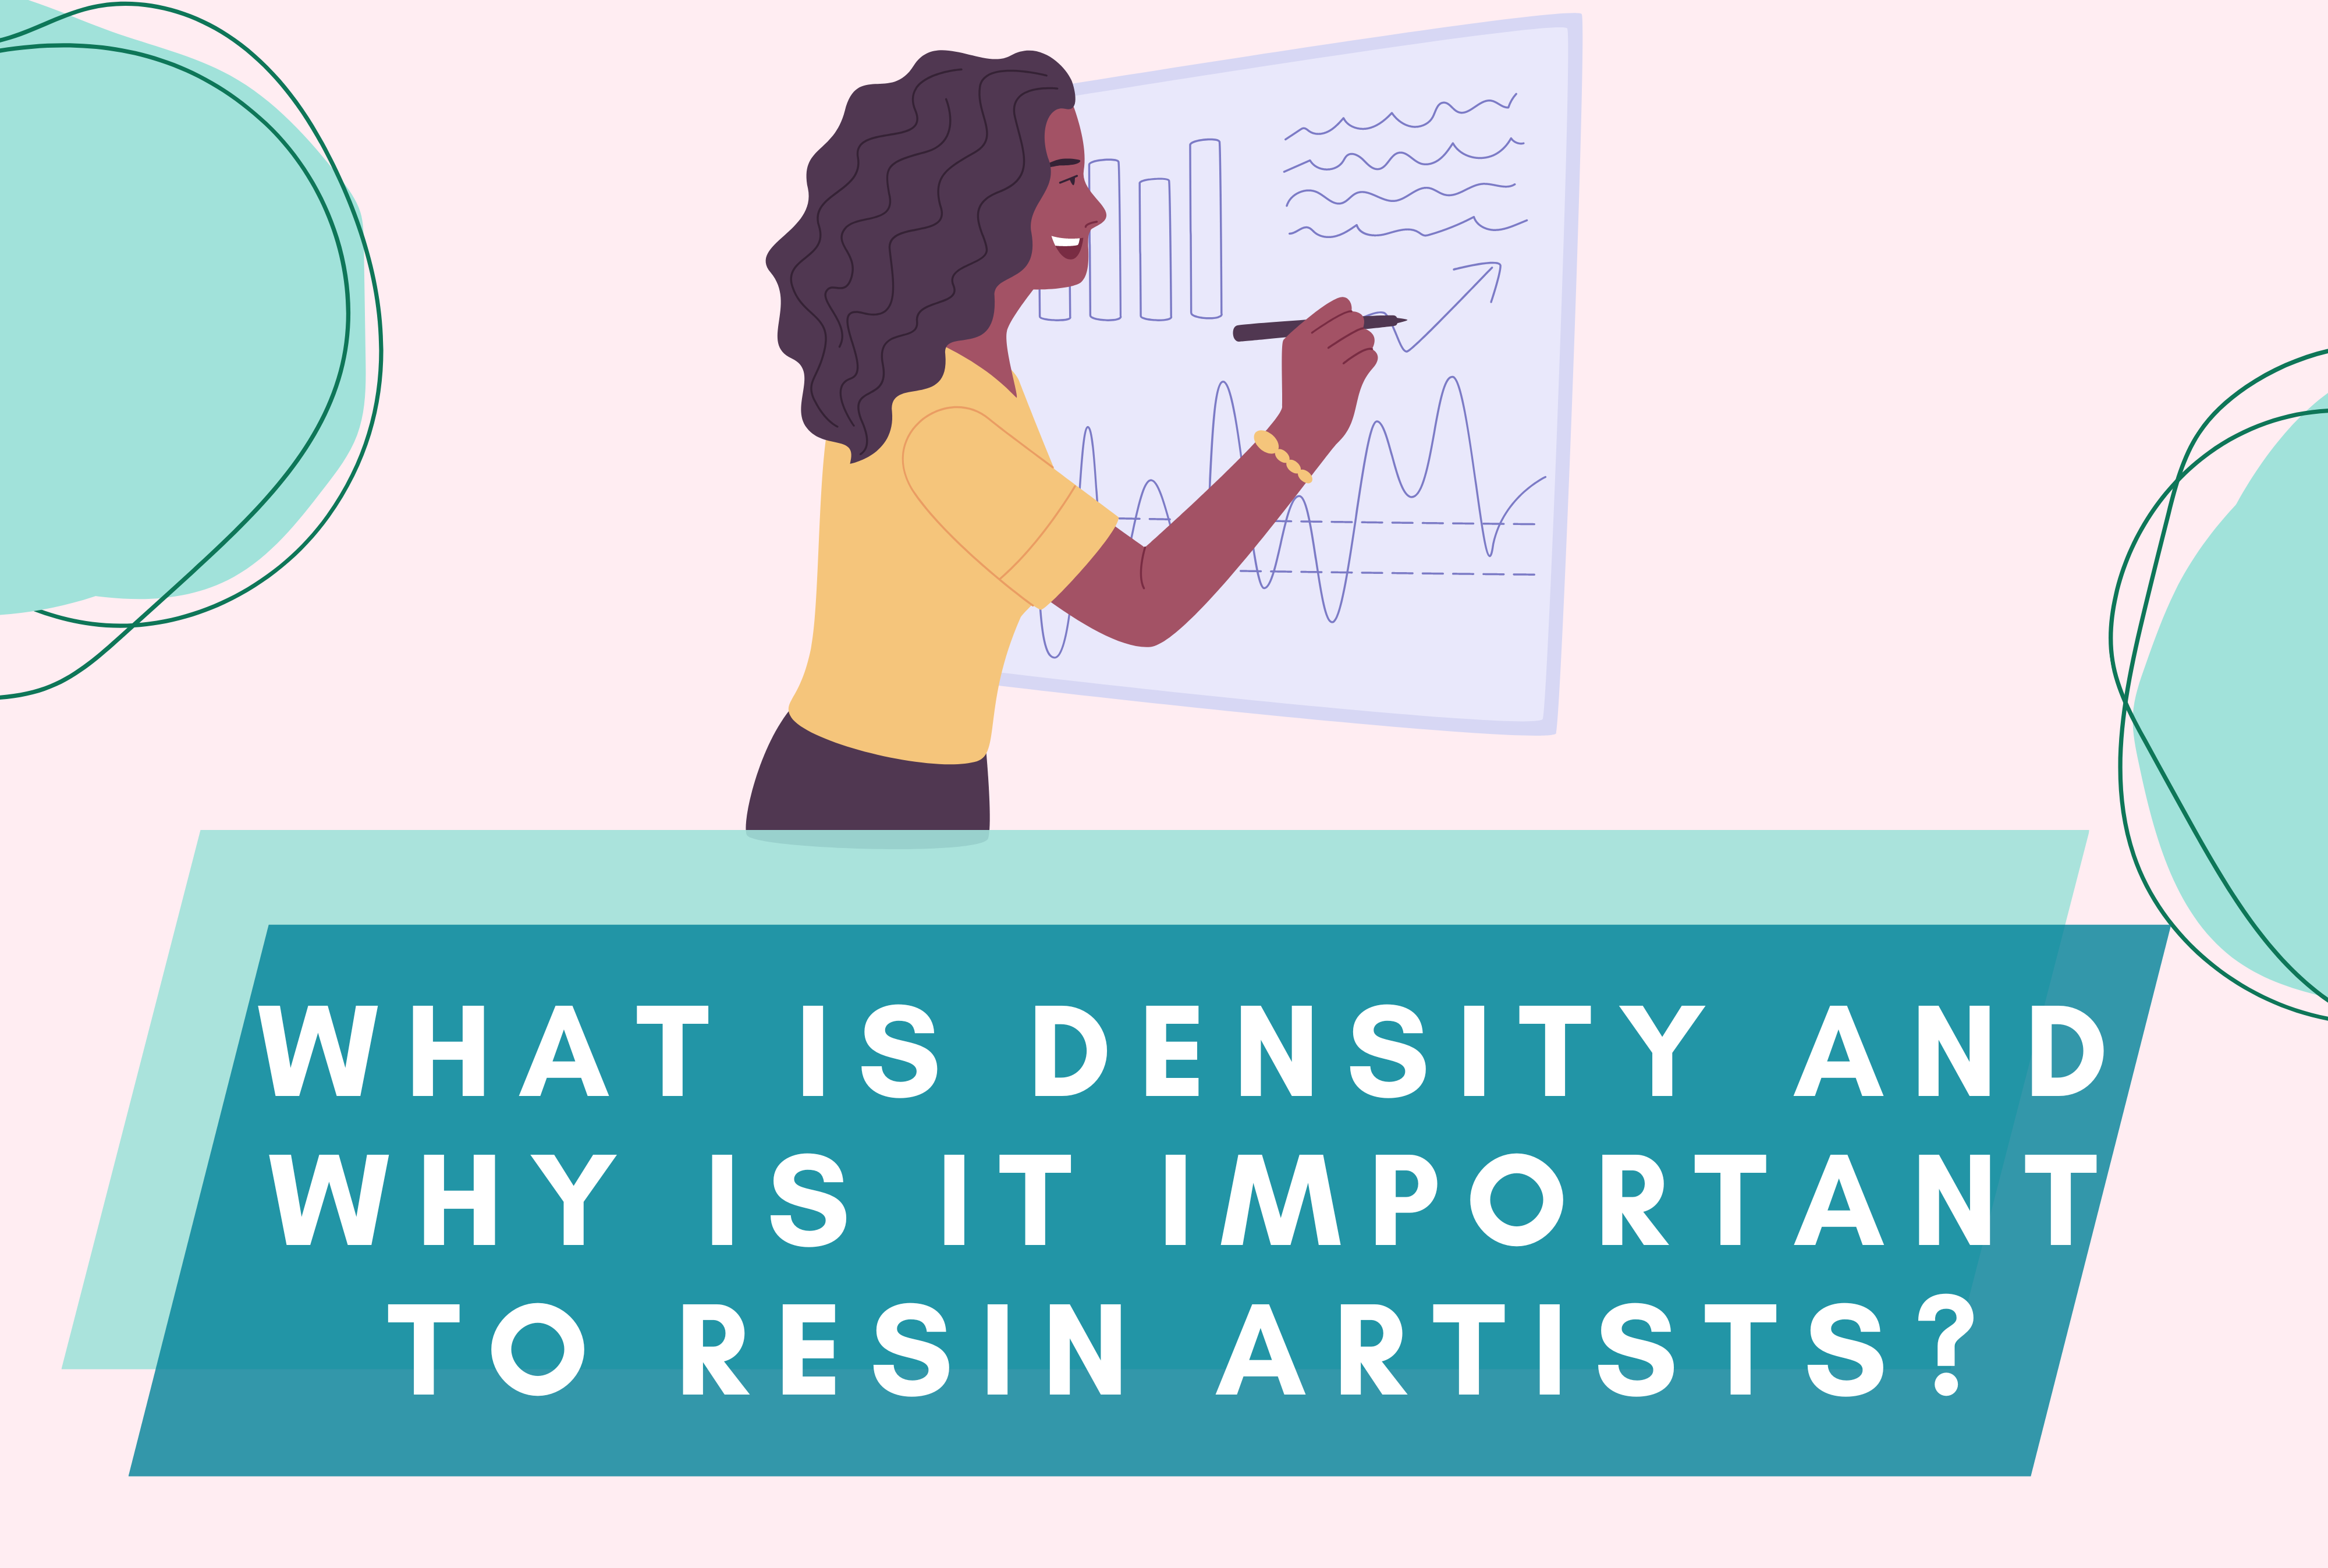 What is Density and why is it important to resin artists?